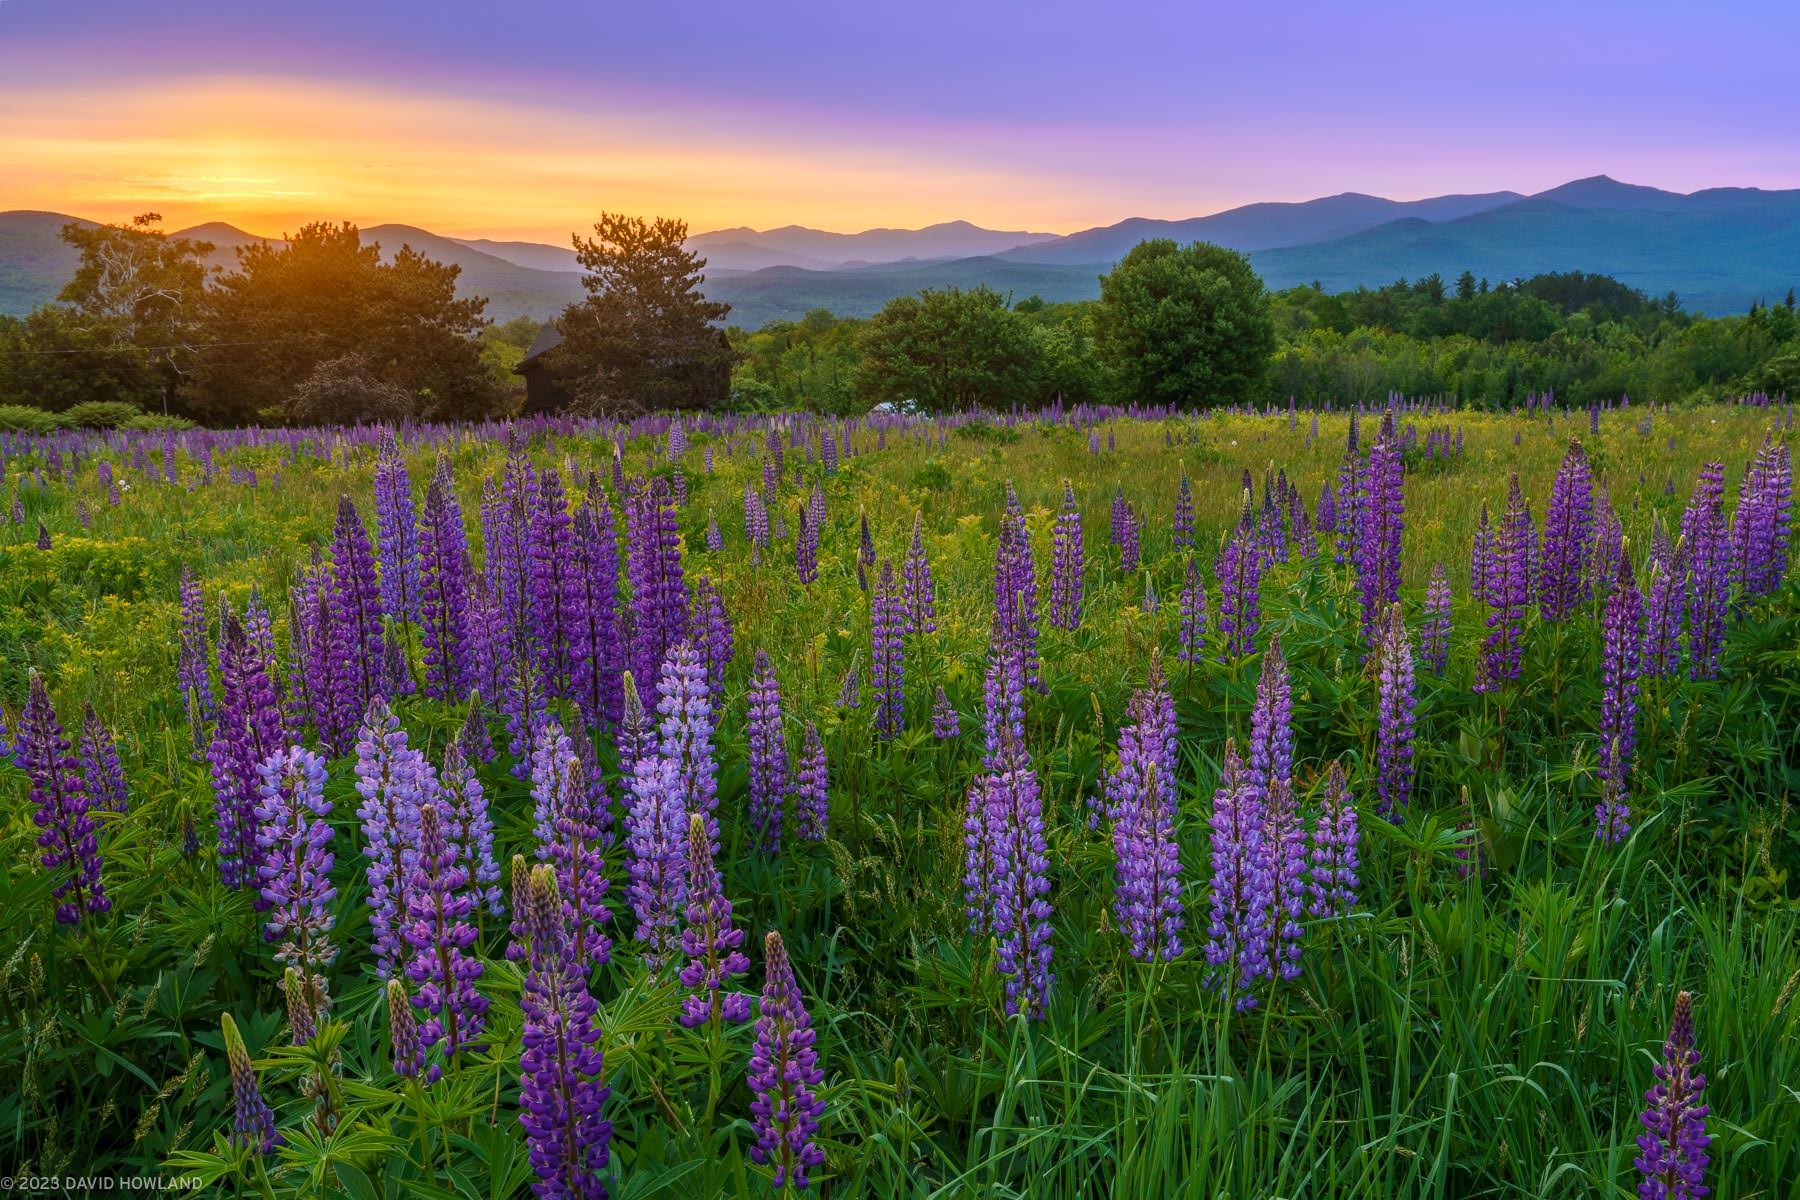 A photo of a colorful sunrise behind a field of purple lupine wildflowers growing in a field in the White Mountains of New Hampshire.